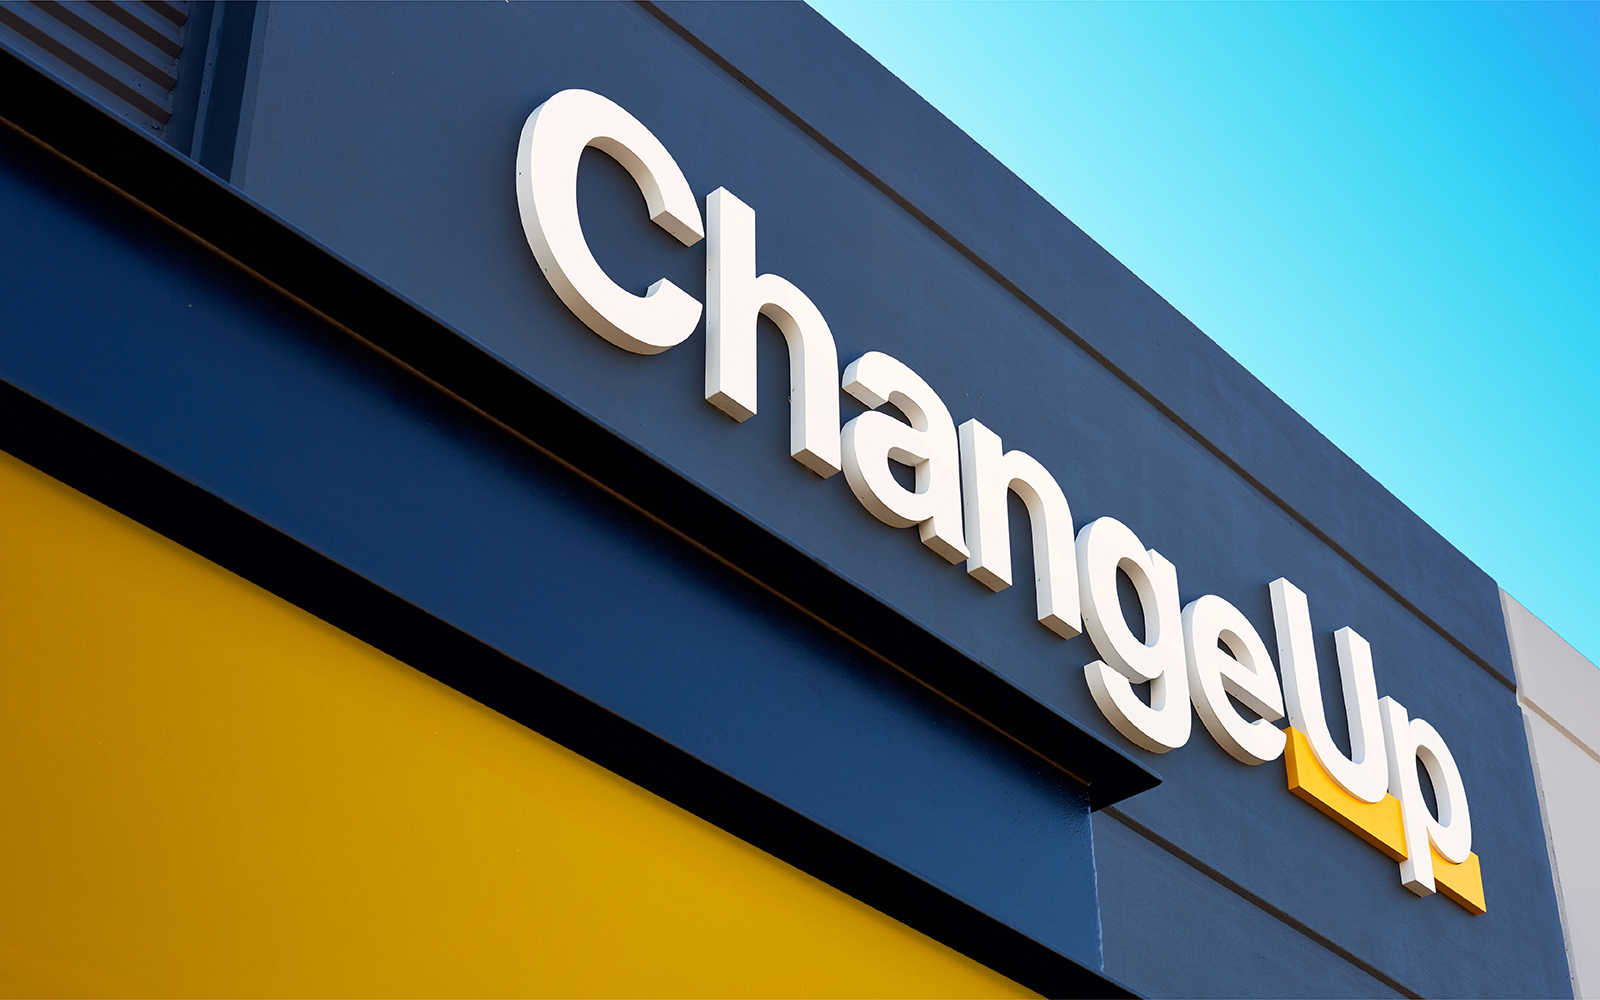 ChangeUp logo on exterior of office